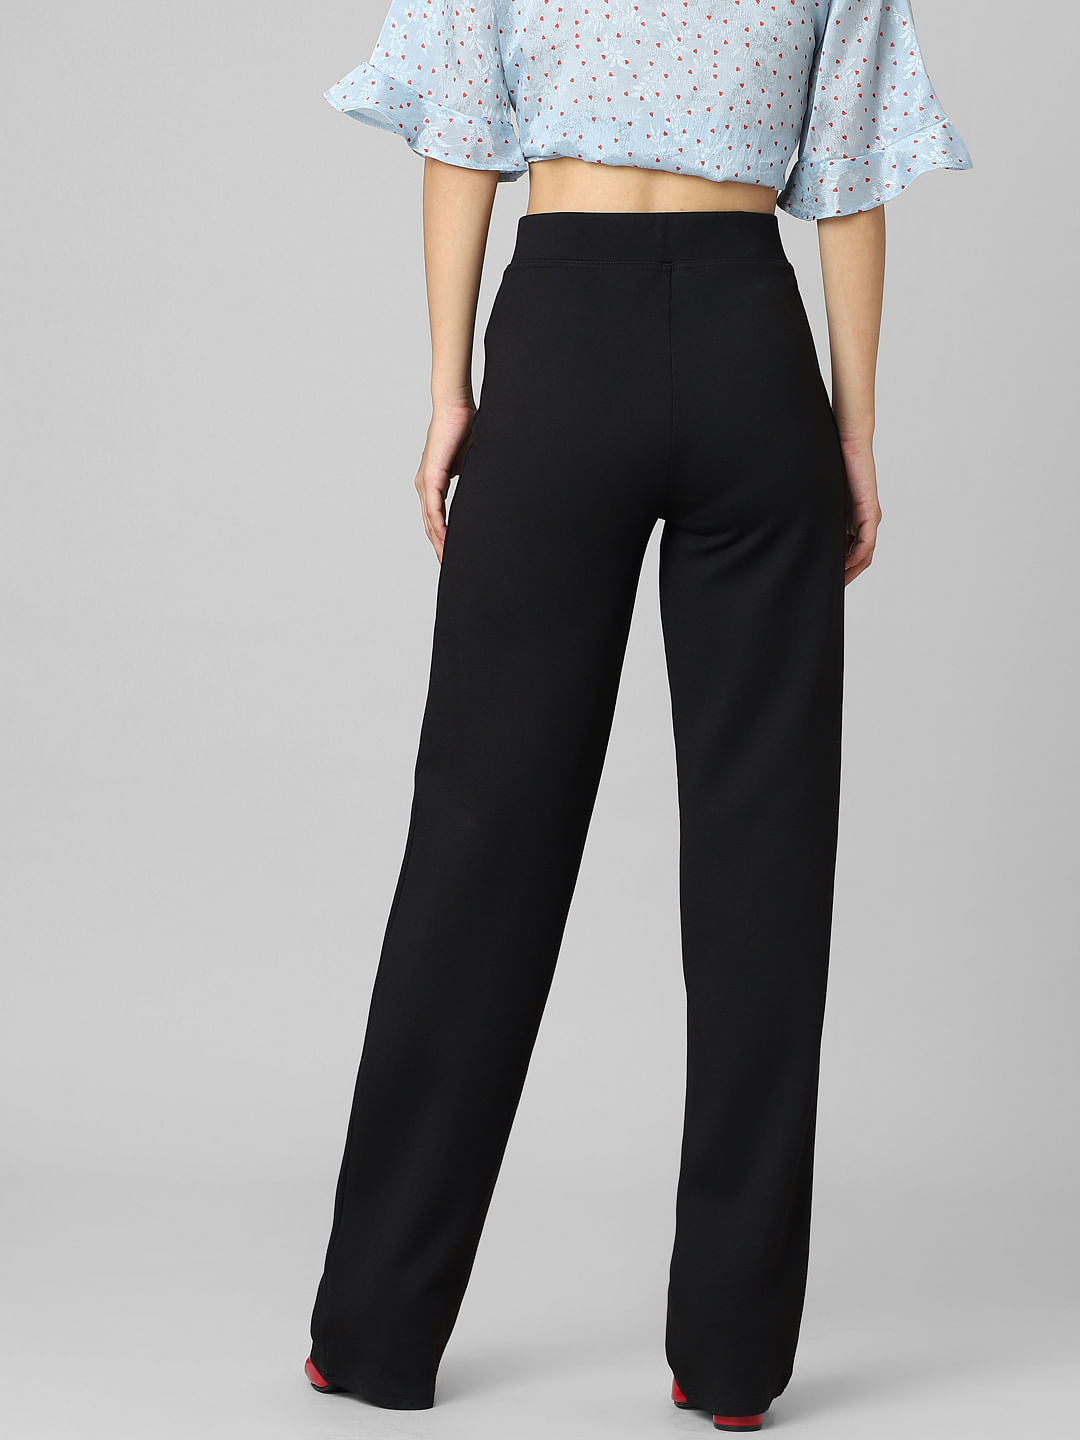 7 Flattering High-Waisted Pants Under $100 - The Girl from Panama